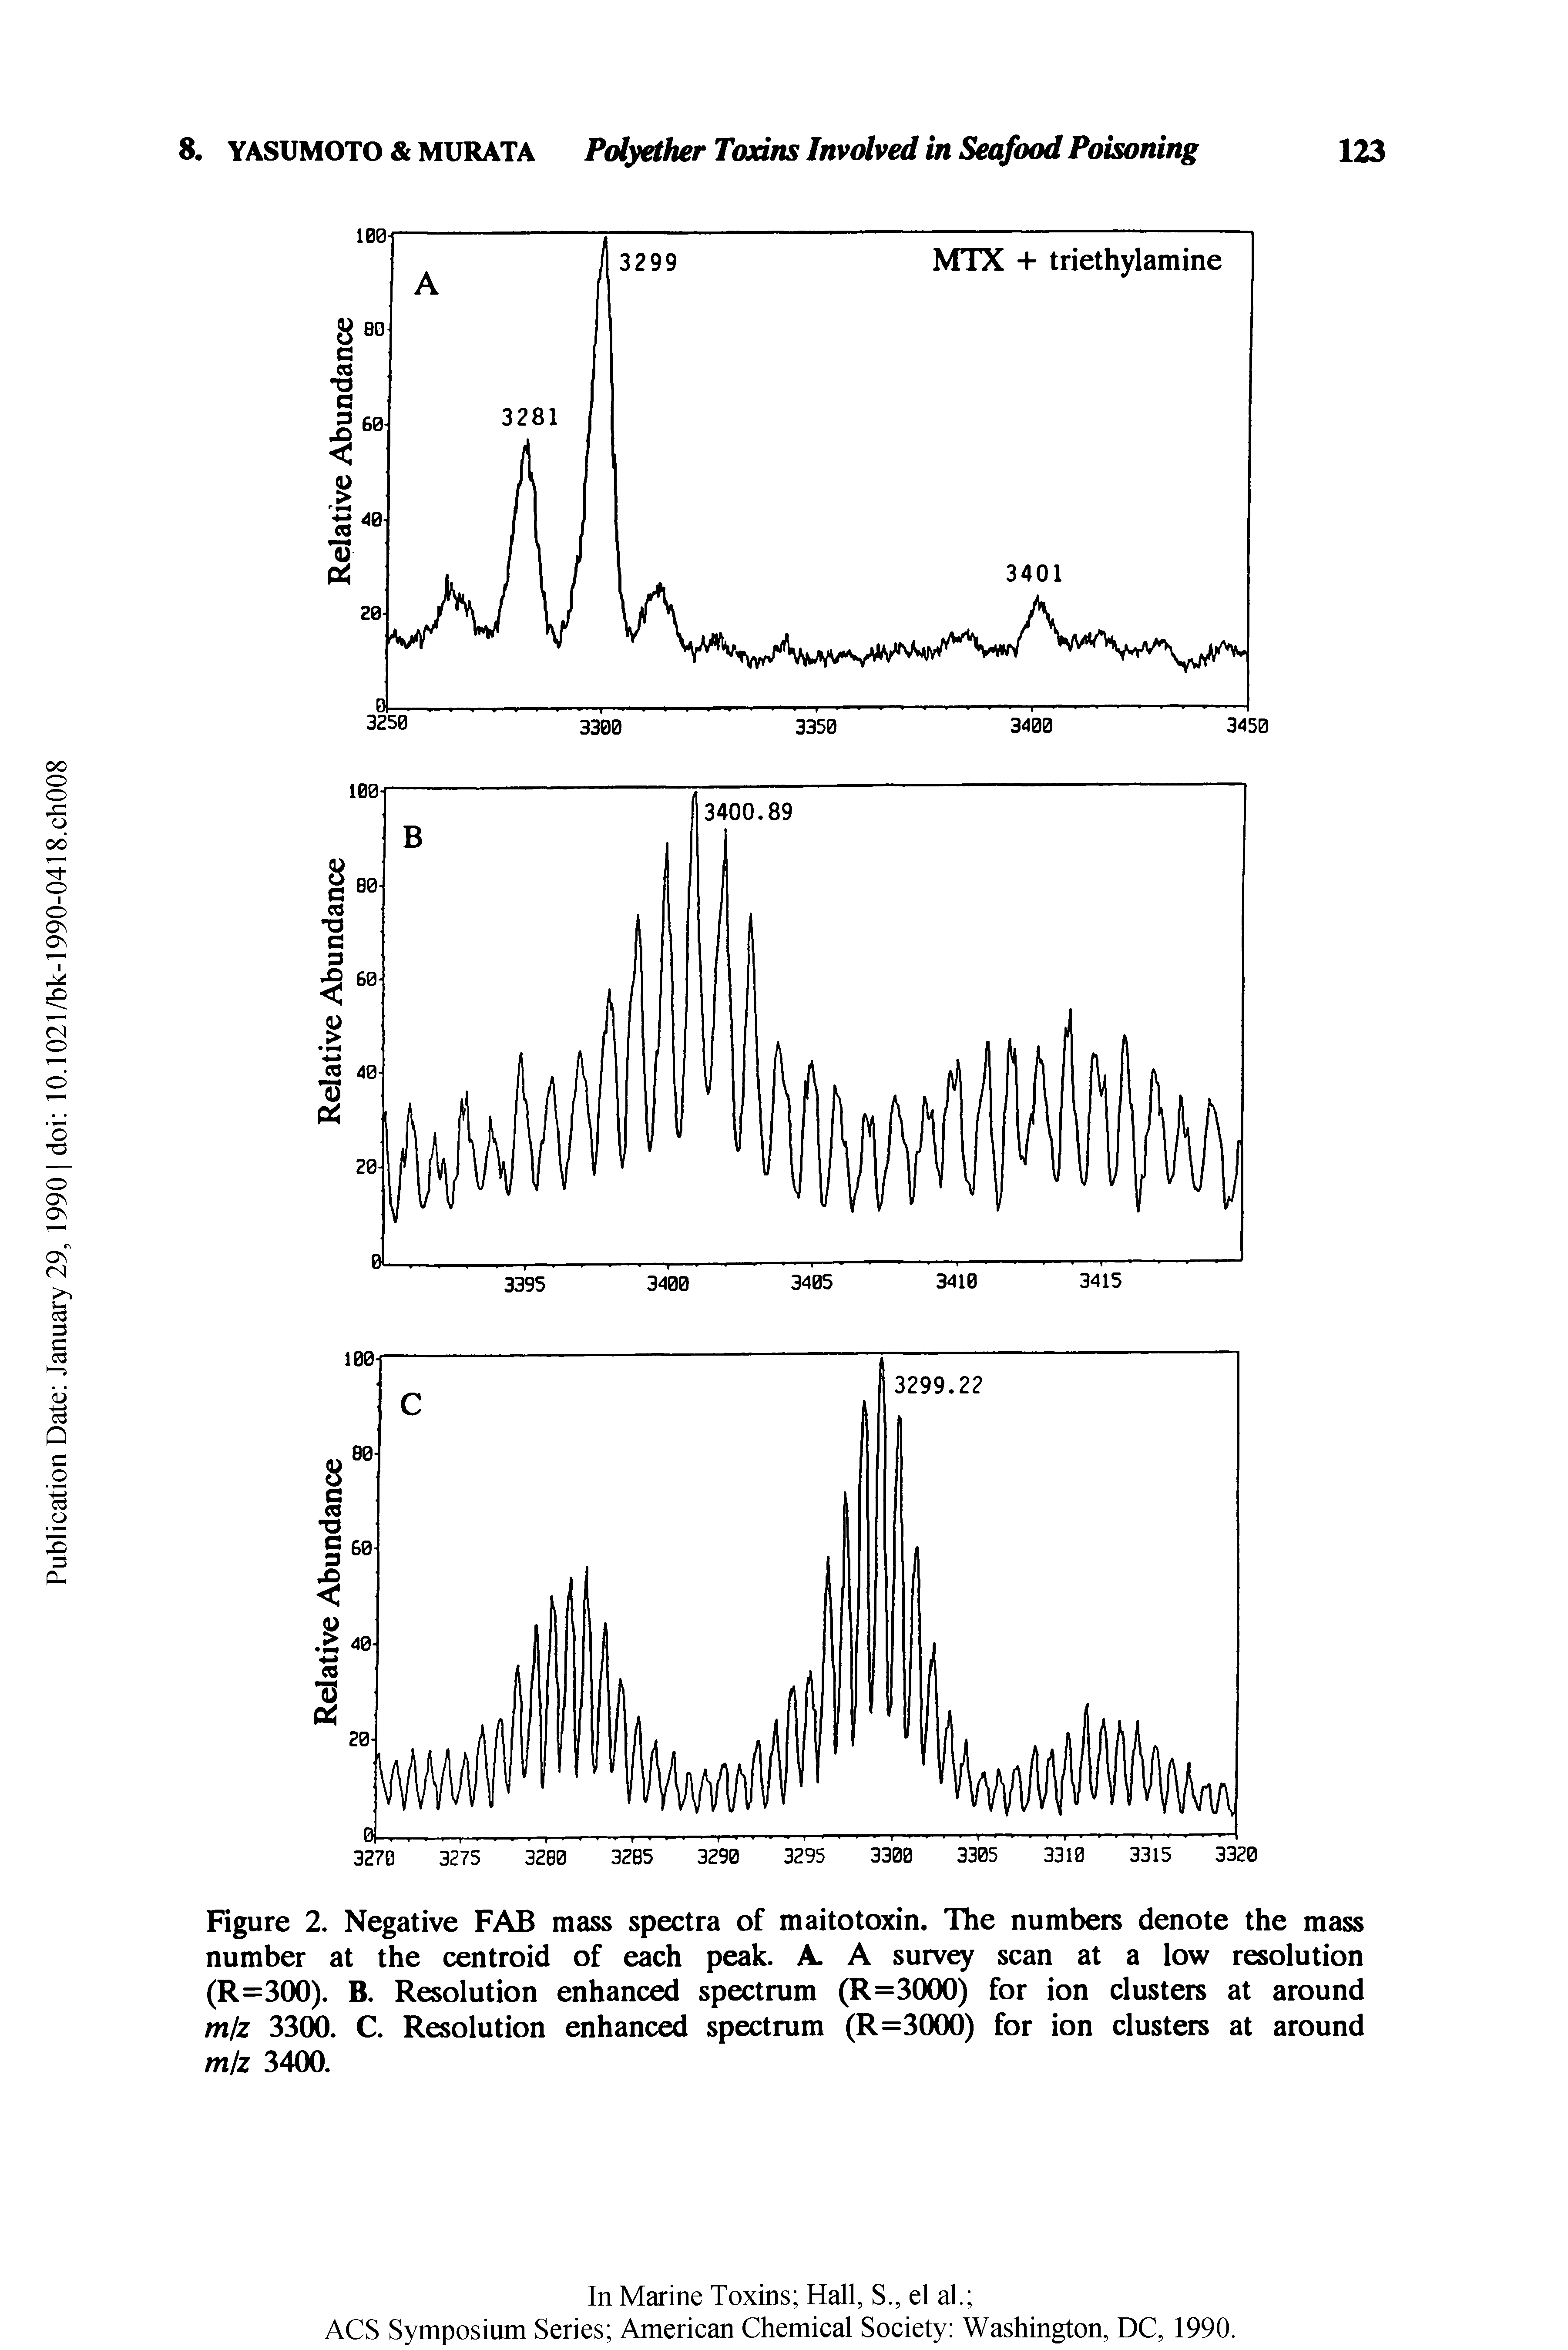 Figure 2. Negative FAB mass spectra of maitotoxin. The numbers denote the mass number at the centroid of each peak. A A survey scan at a low resolution (R=300). B. Resolution enhanced spectrum (R=3000) for ion clusters at around m/z 3300. C. Resolution enhanced spectrum (R=3000) for ion clusters at around miz 3400.